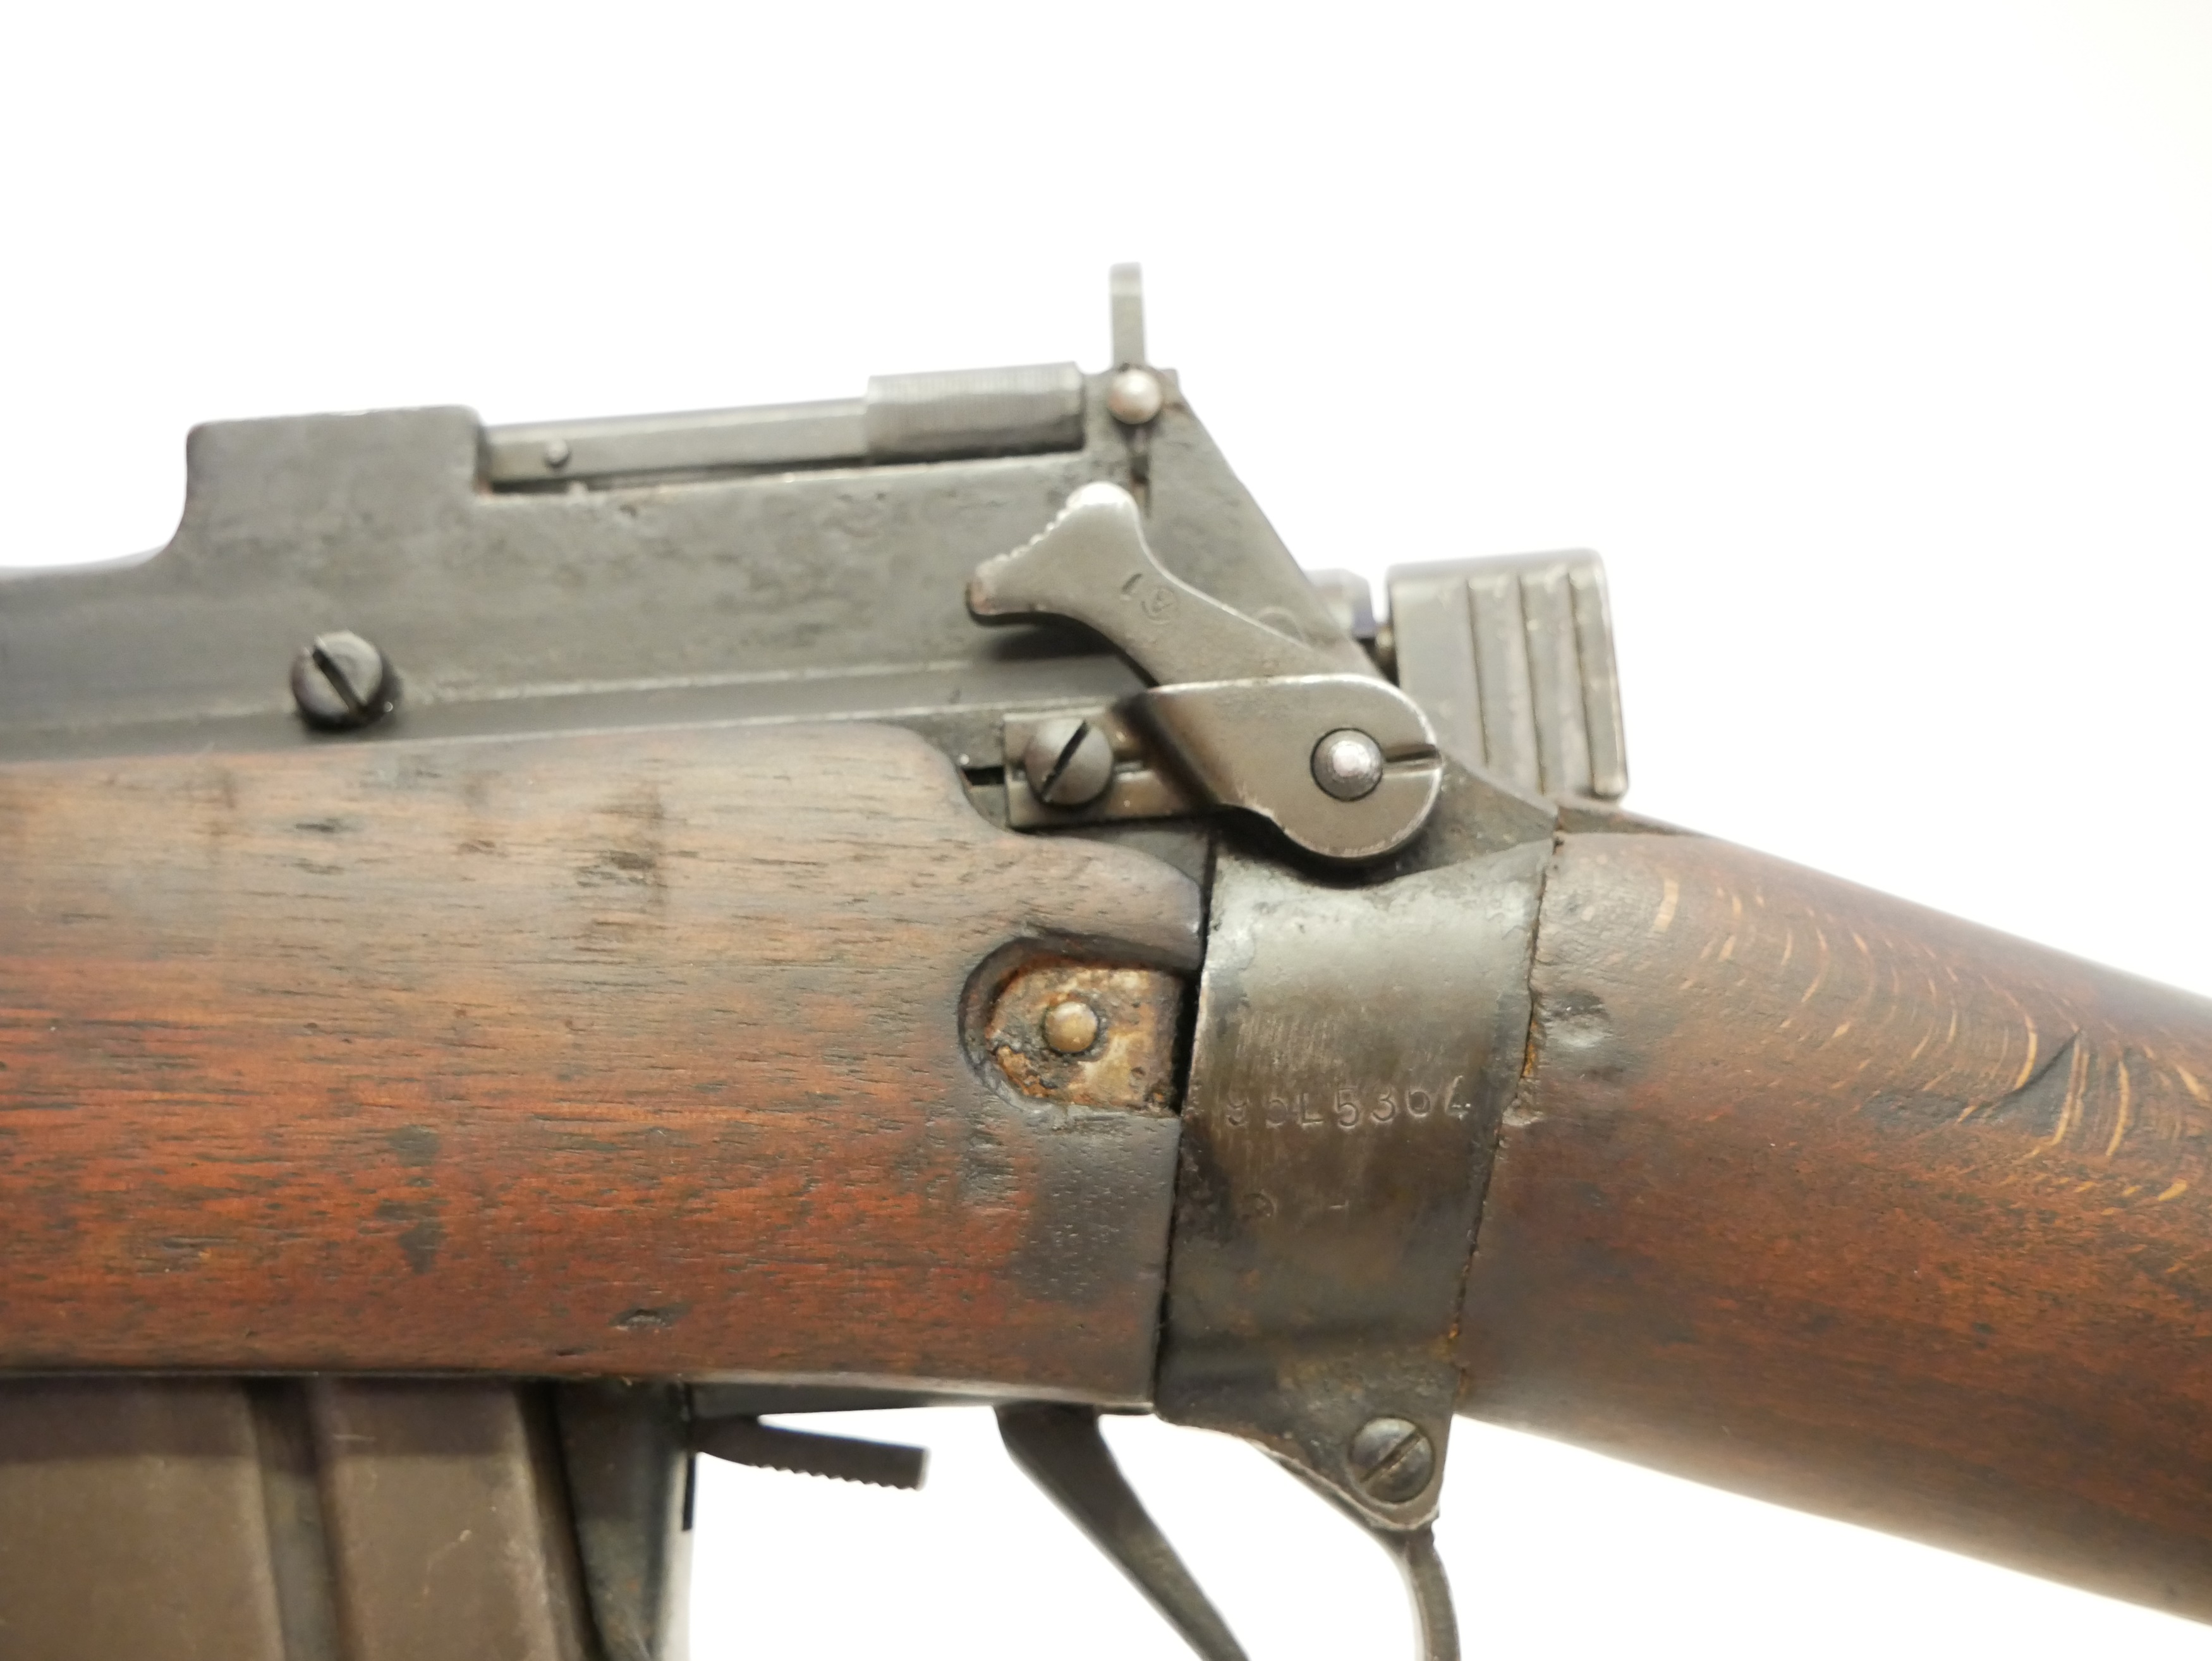 Deactivated WWII Lee Enfield No4 MKI* Long Branch 1944 - Allied Deactivated  Guns - Deactivated Guns